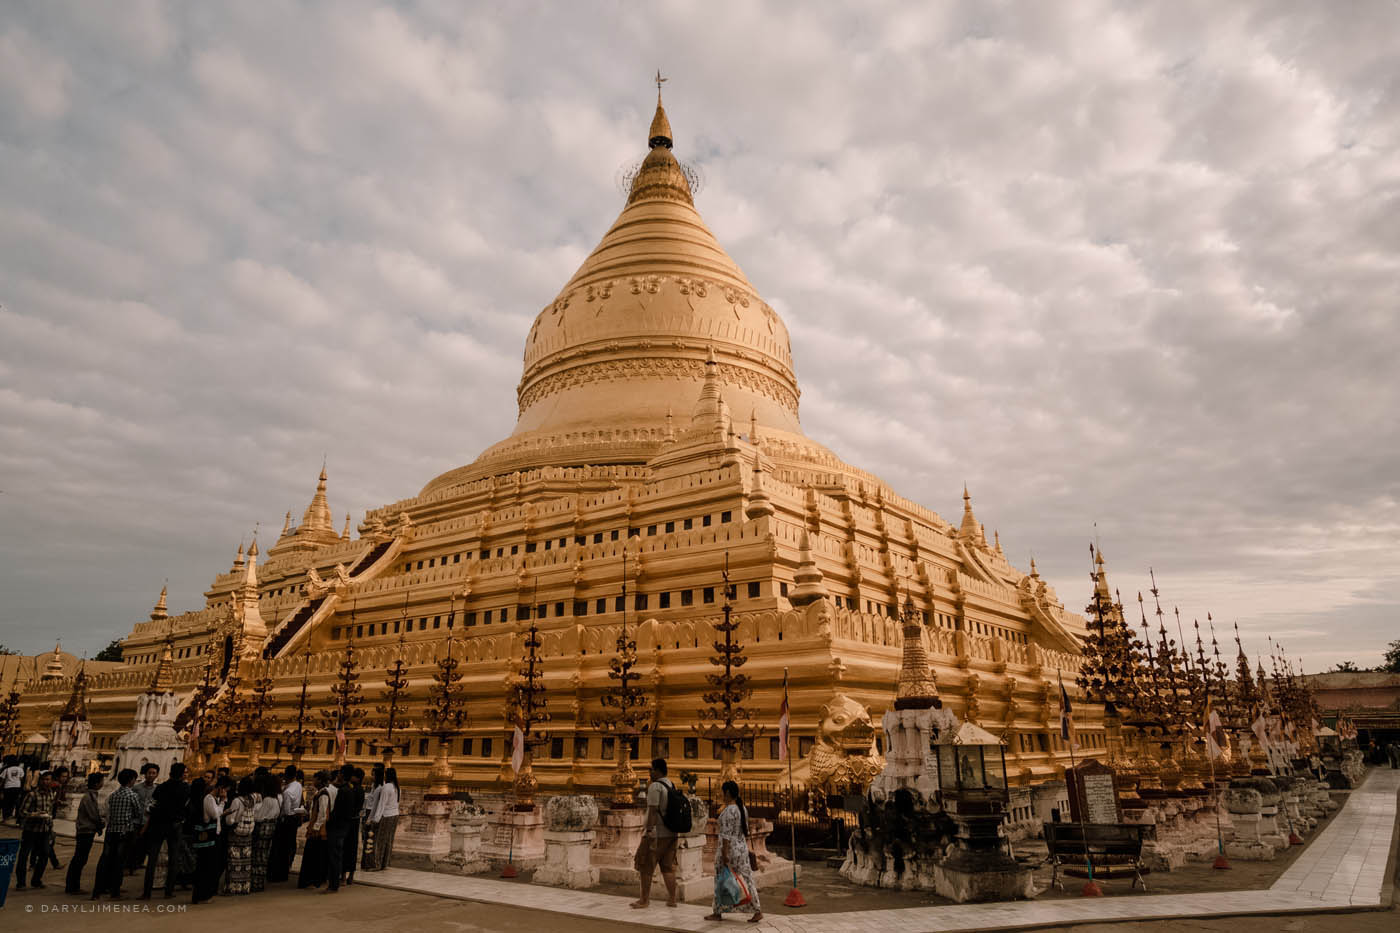 Shwezigon pagoda, a gold plated pagoda built by the founder of the Bagan empire